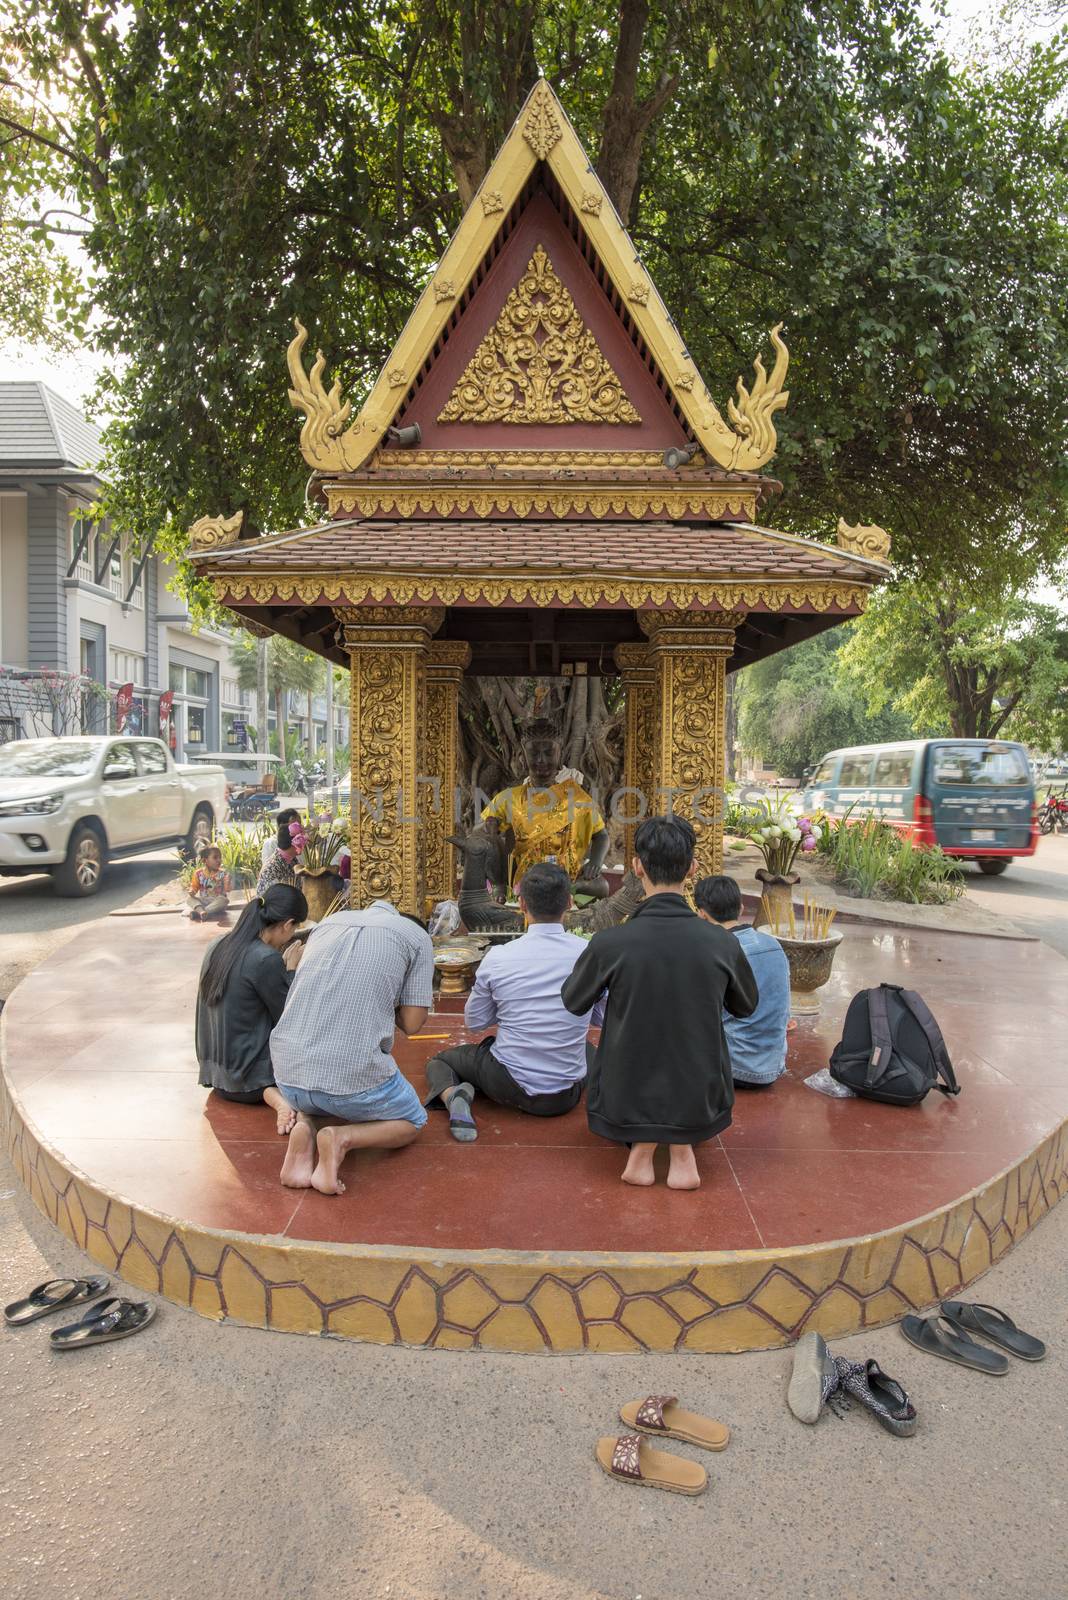 Cambodian Worshippers praying in front of King Master Statue located under a tree and in the Middle of the road, Siem Reap, Cambodia